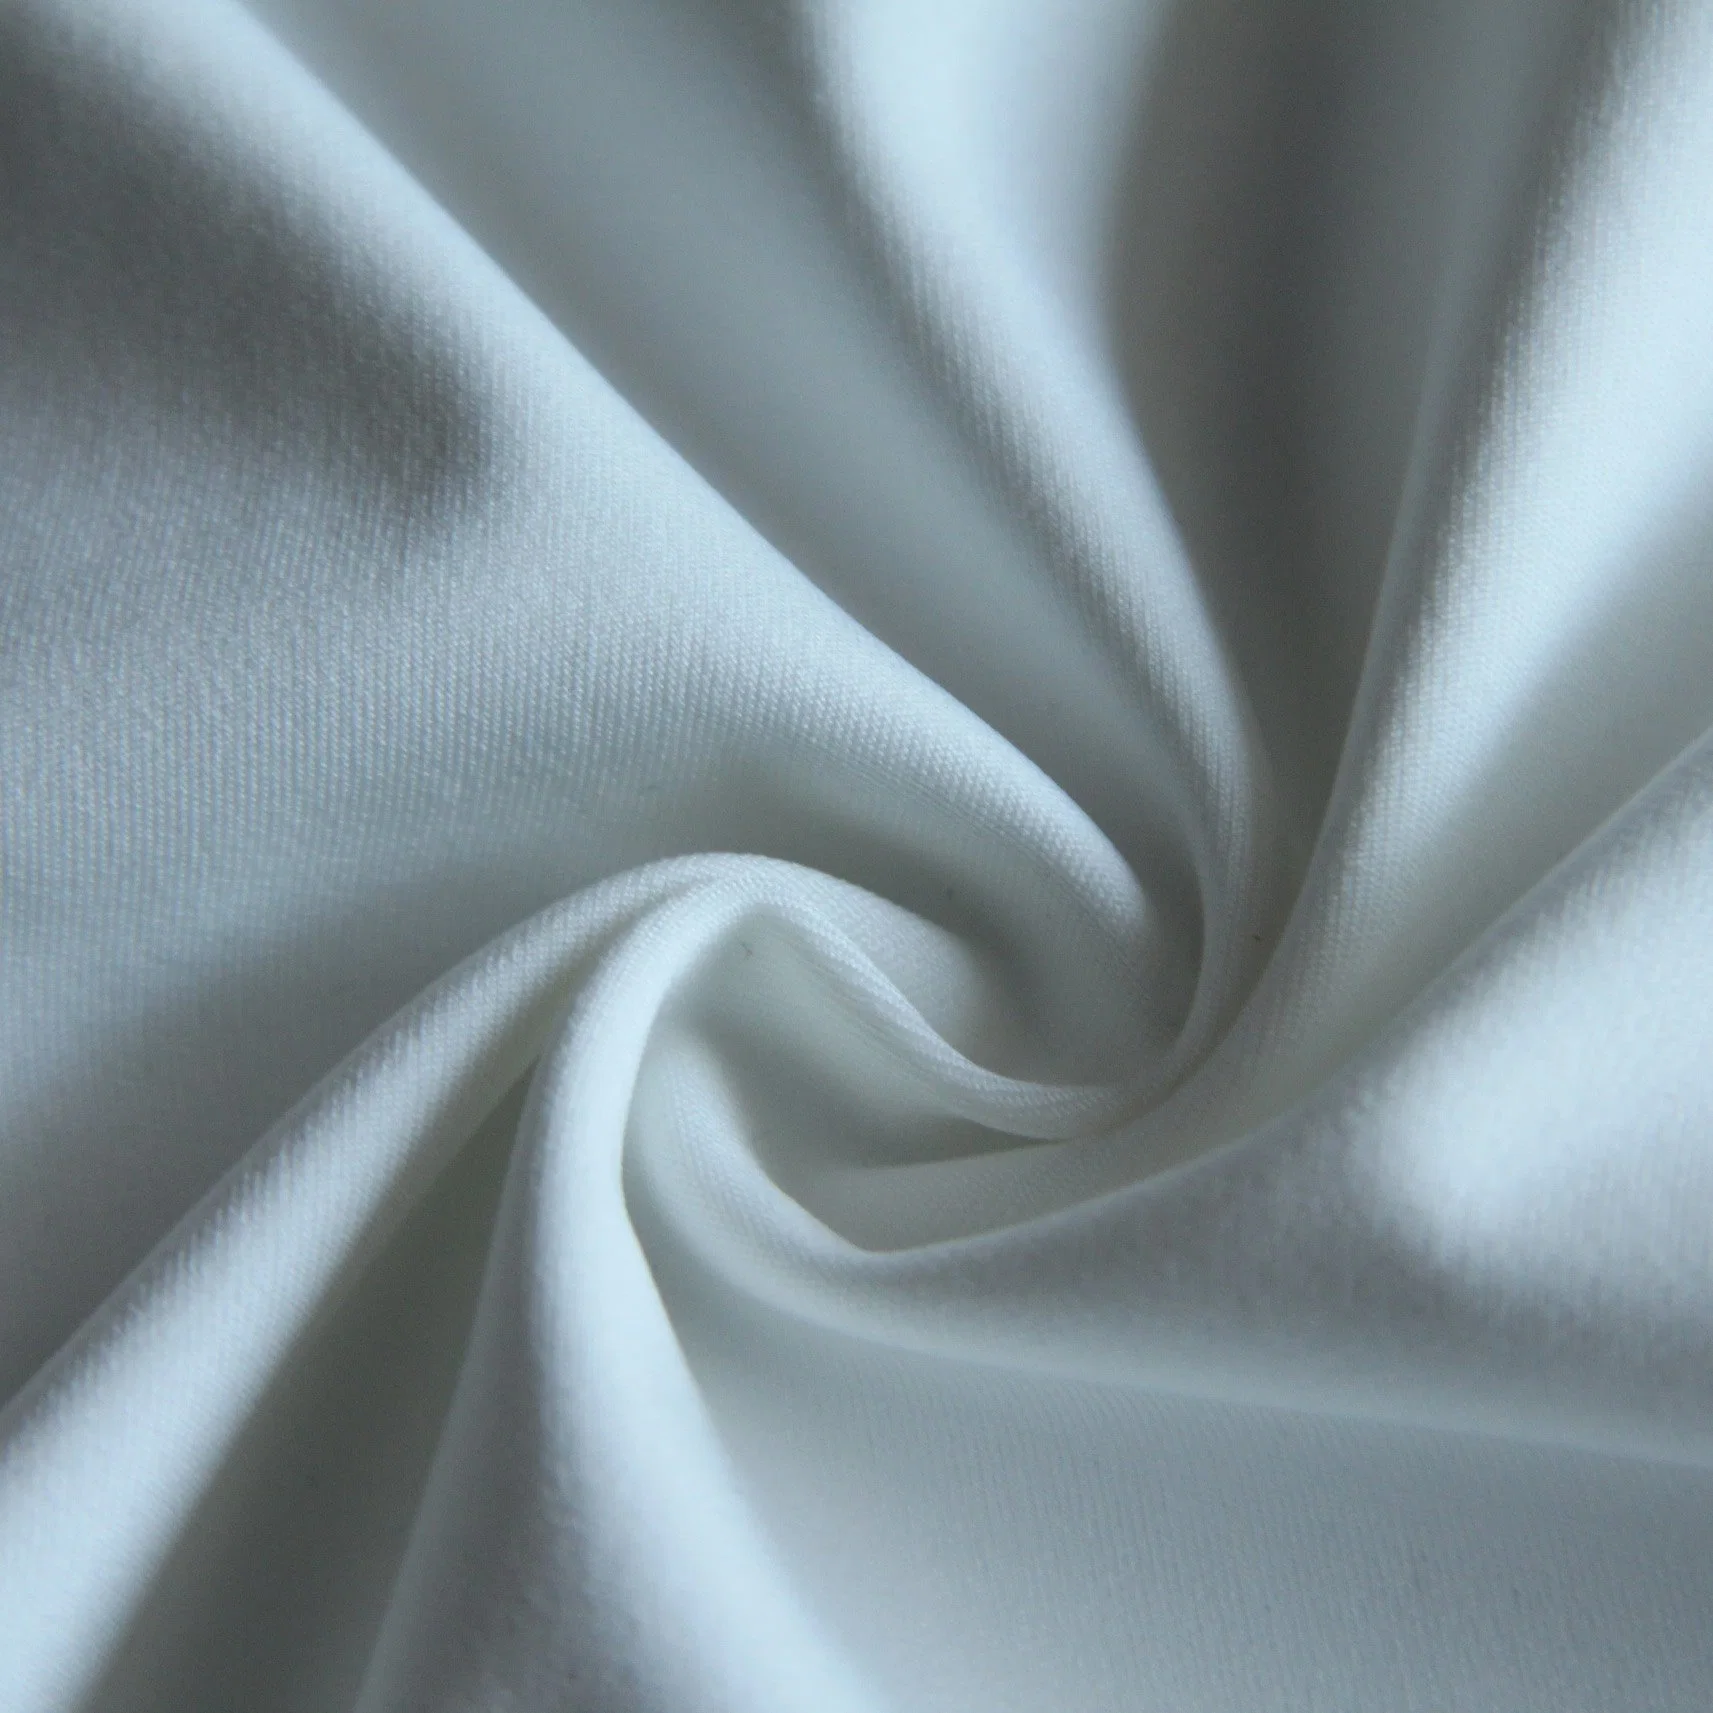 83%Polyester 18%Spandex Plain Weft Knitted Polyester Spandex Interlock Fabric 245GSM for Sportswear/Yoga/Swimming/Garment